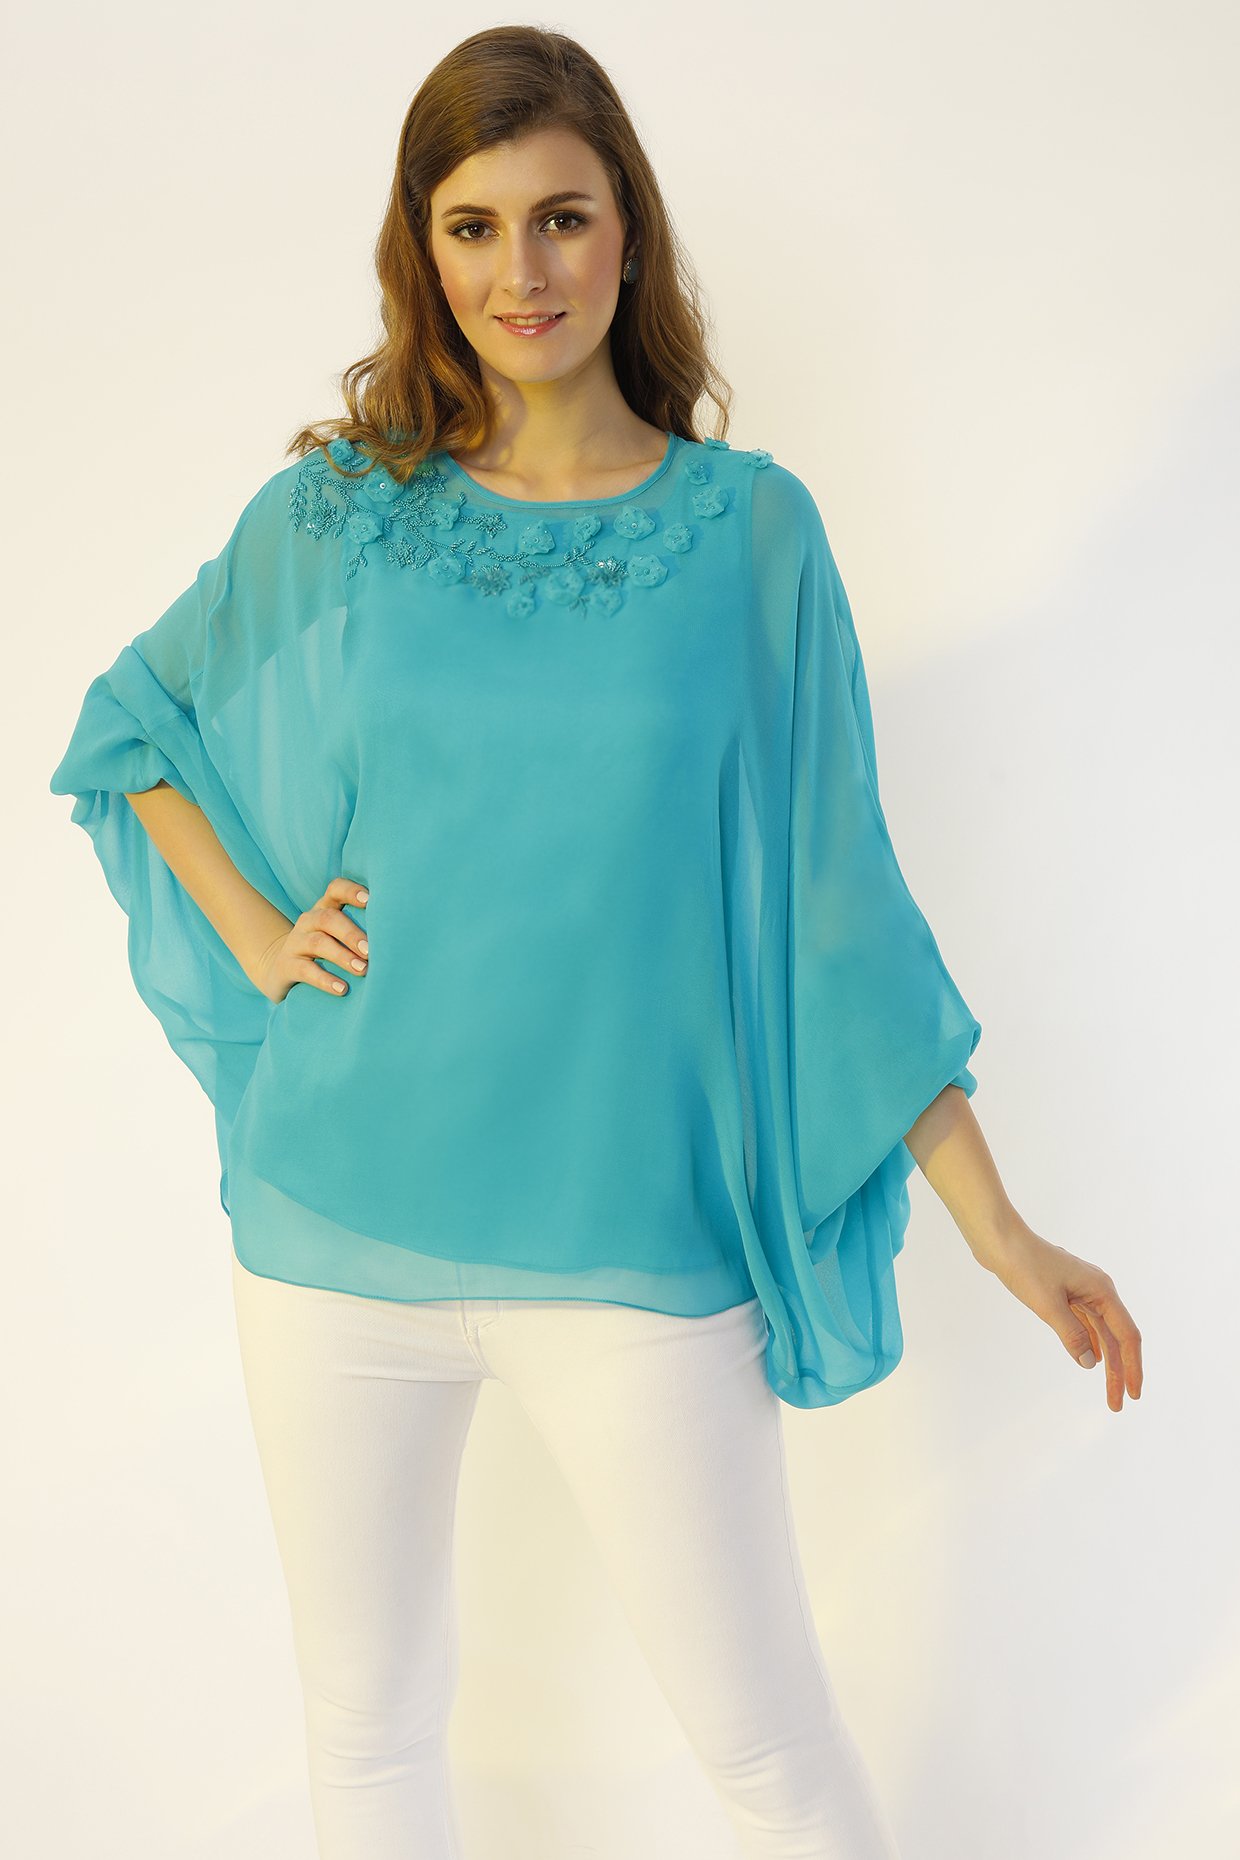 Embroidered Top – Turquoise and Tequila